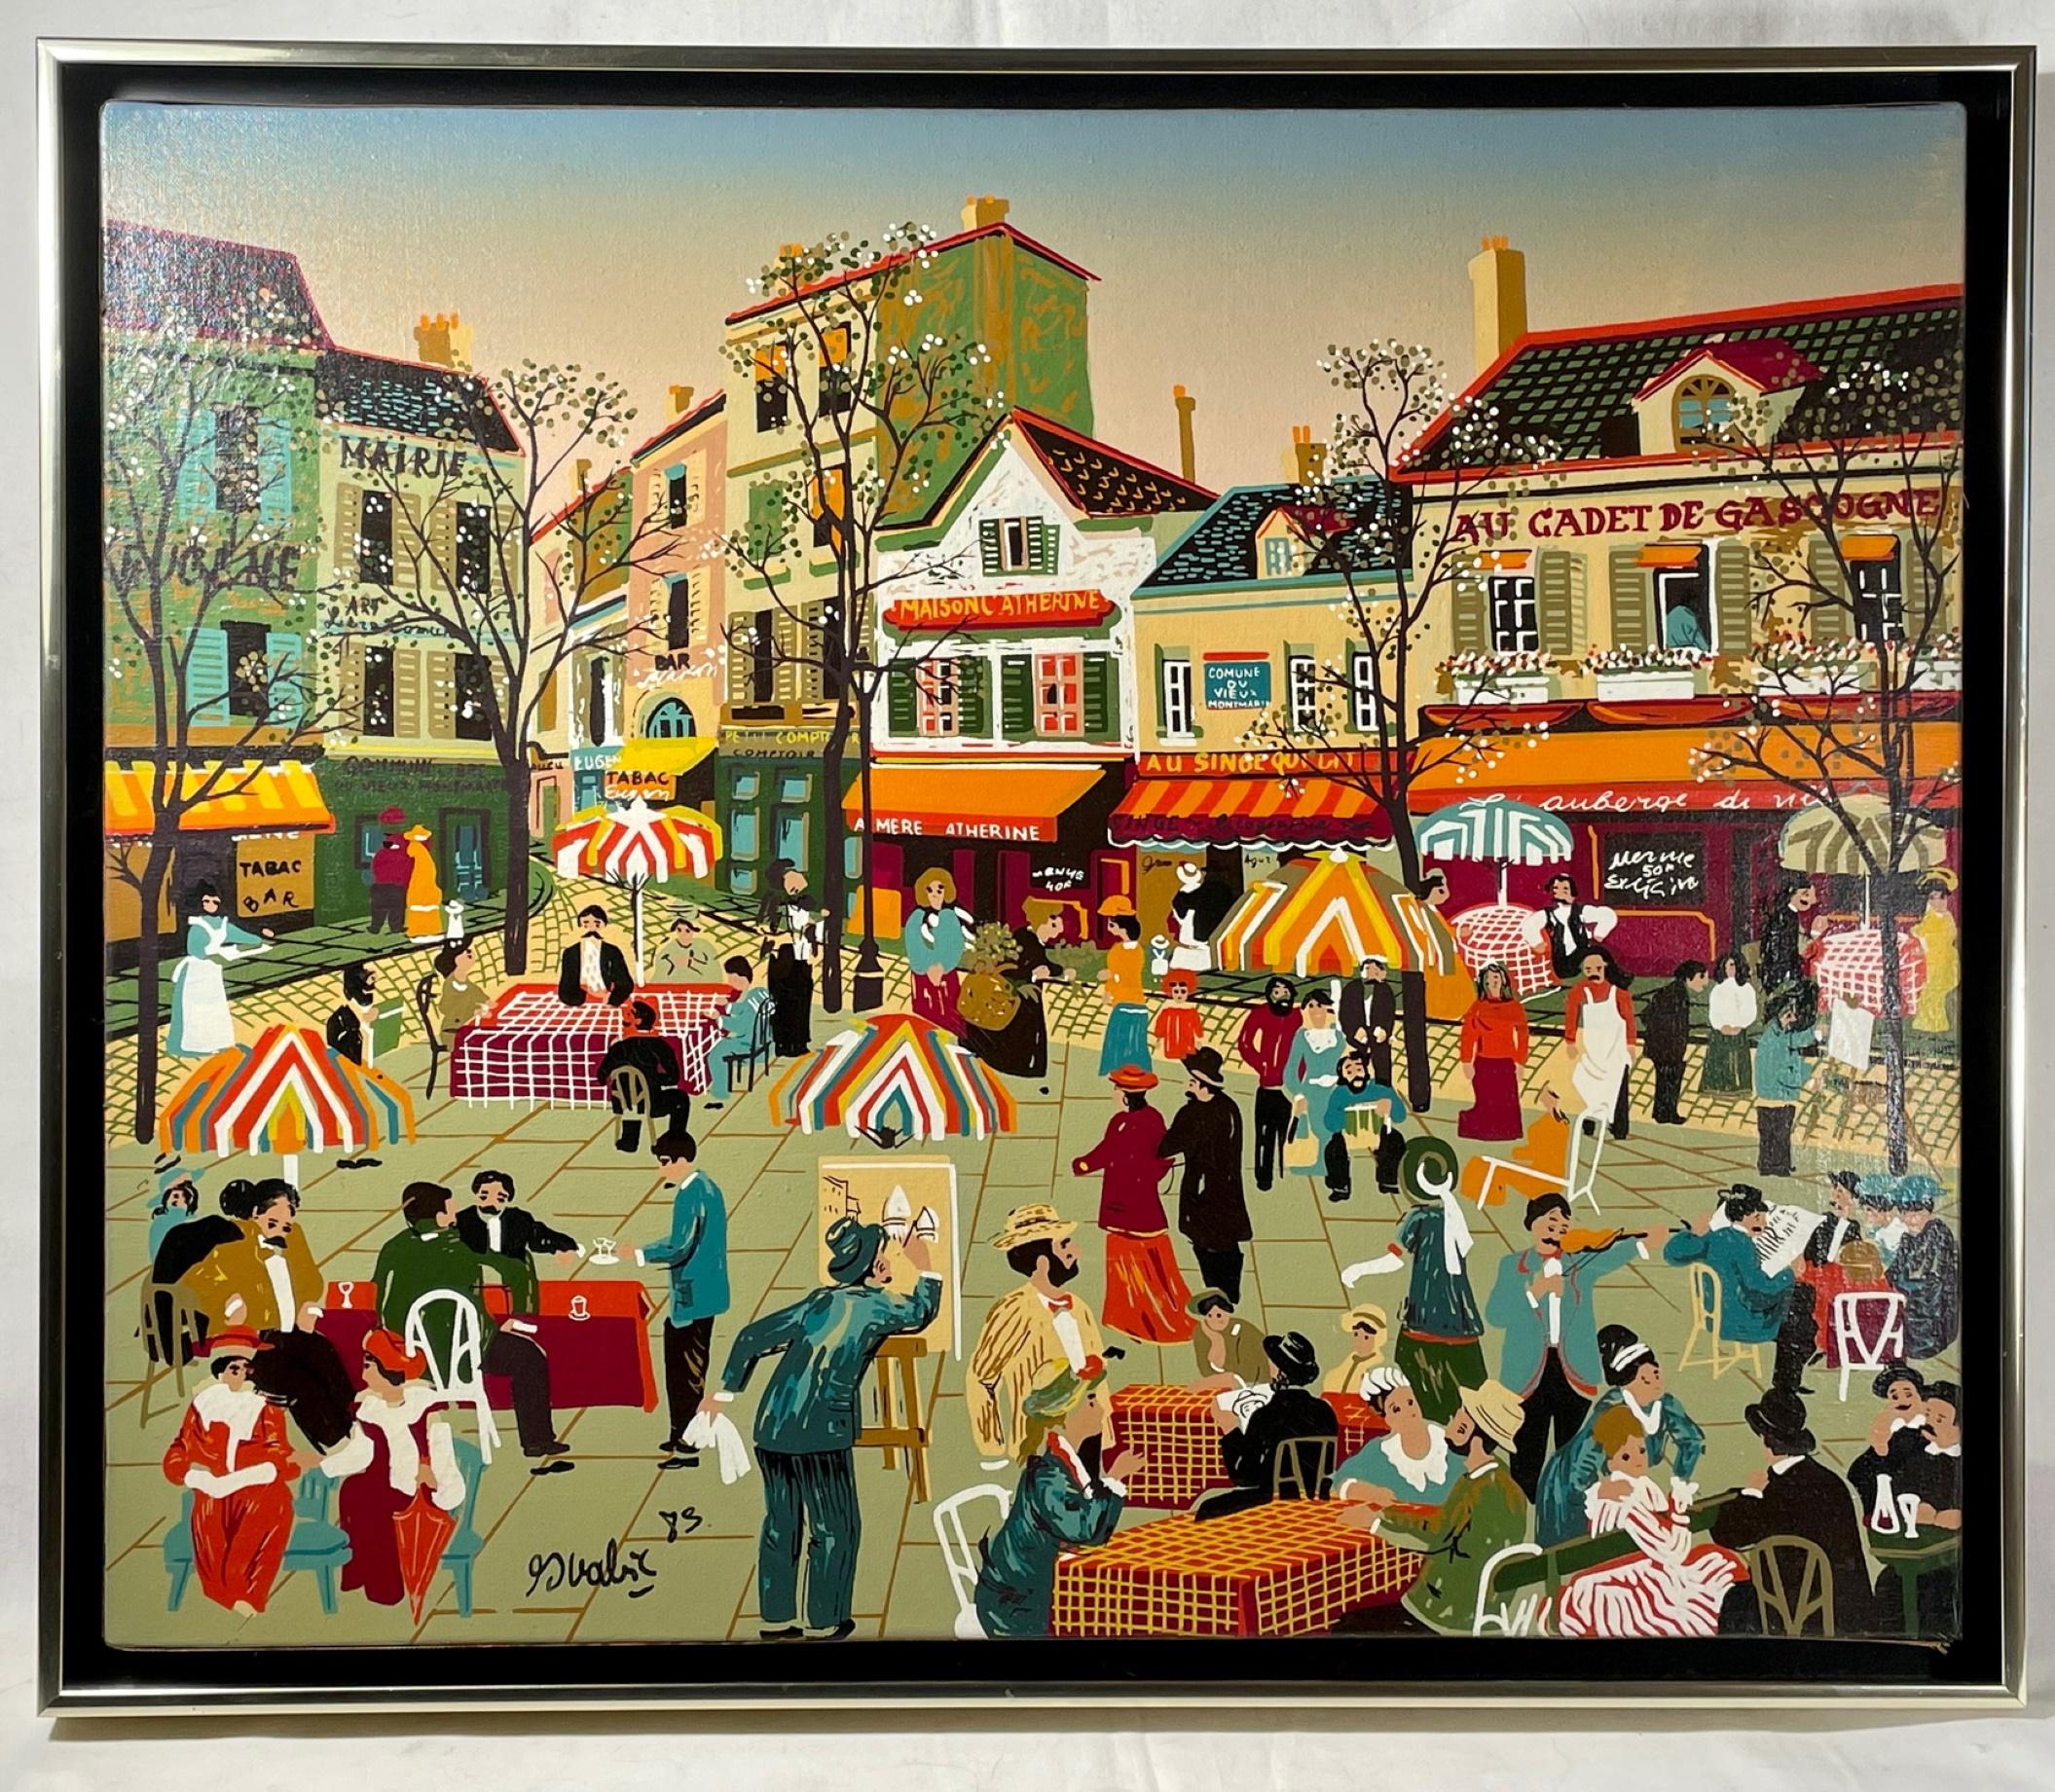 Vintage French Parisian Folk Art Signed painting.

This charming Folk Art painting of Parisian life is created in the style of Michel Delacroix. The colorful scene displays a simpler Paris of the past at the Place du Tertre on top of a hill next